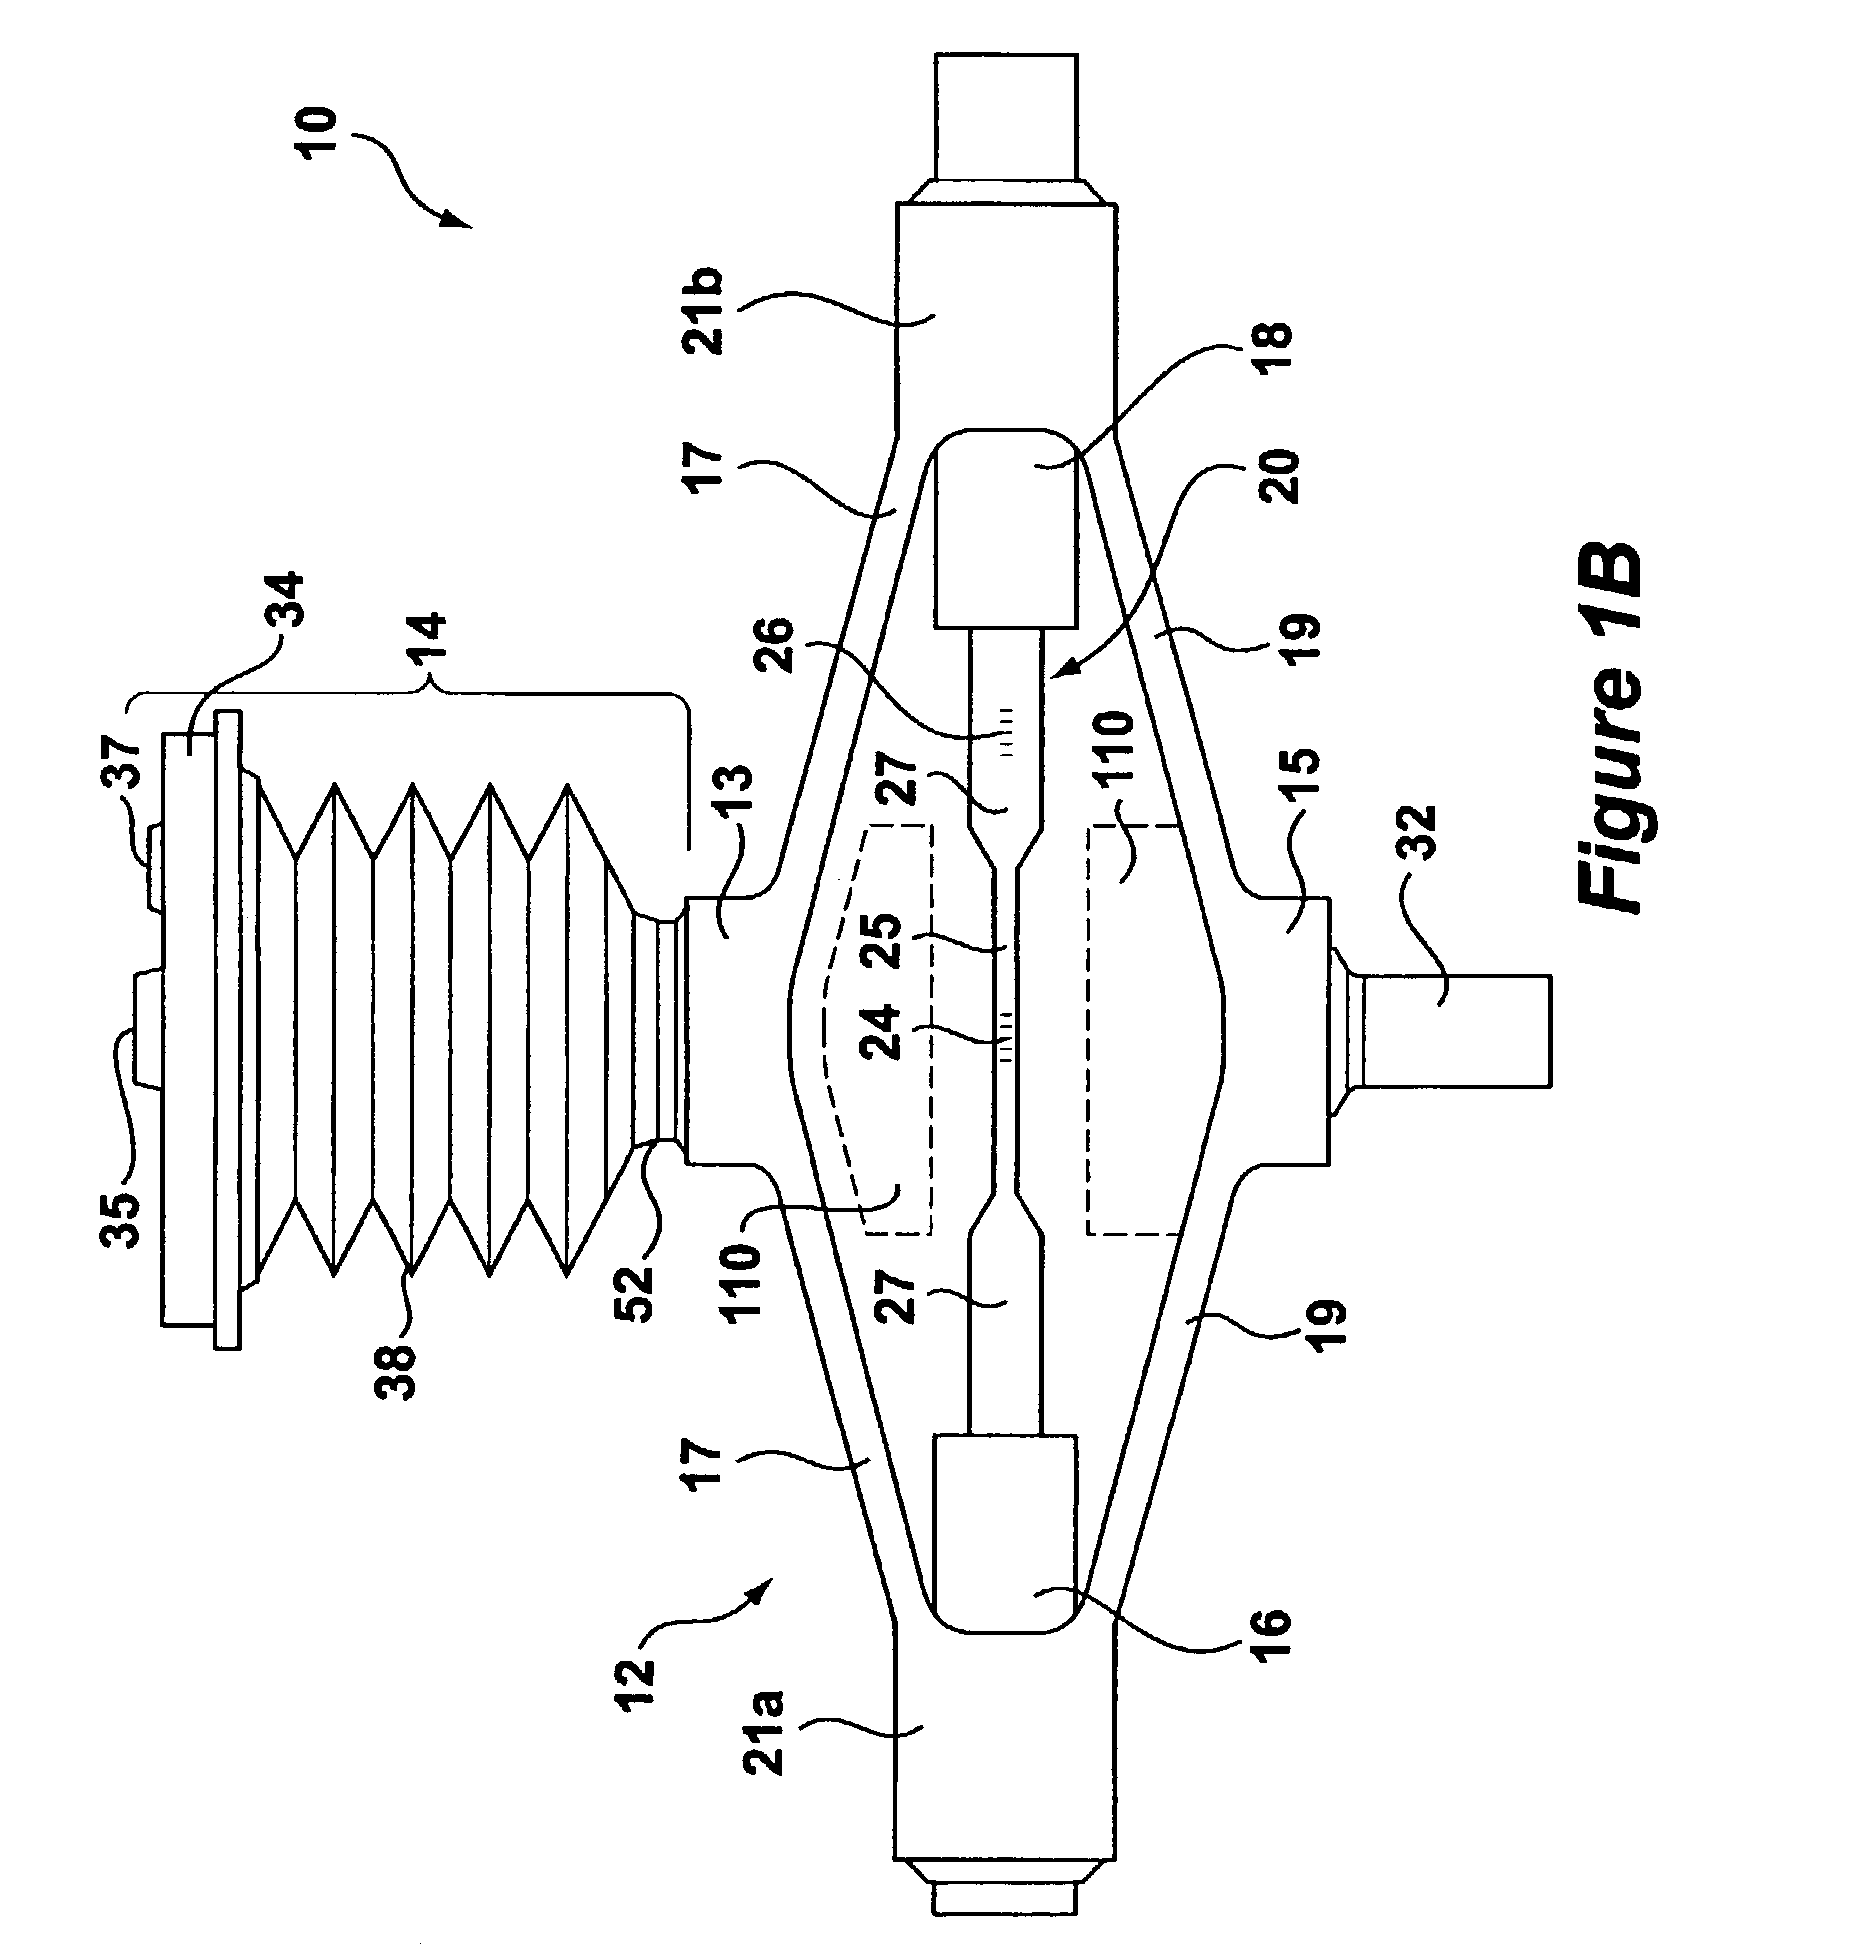 Optical differential pressure transducer utilizing a bellows and flexure system